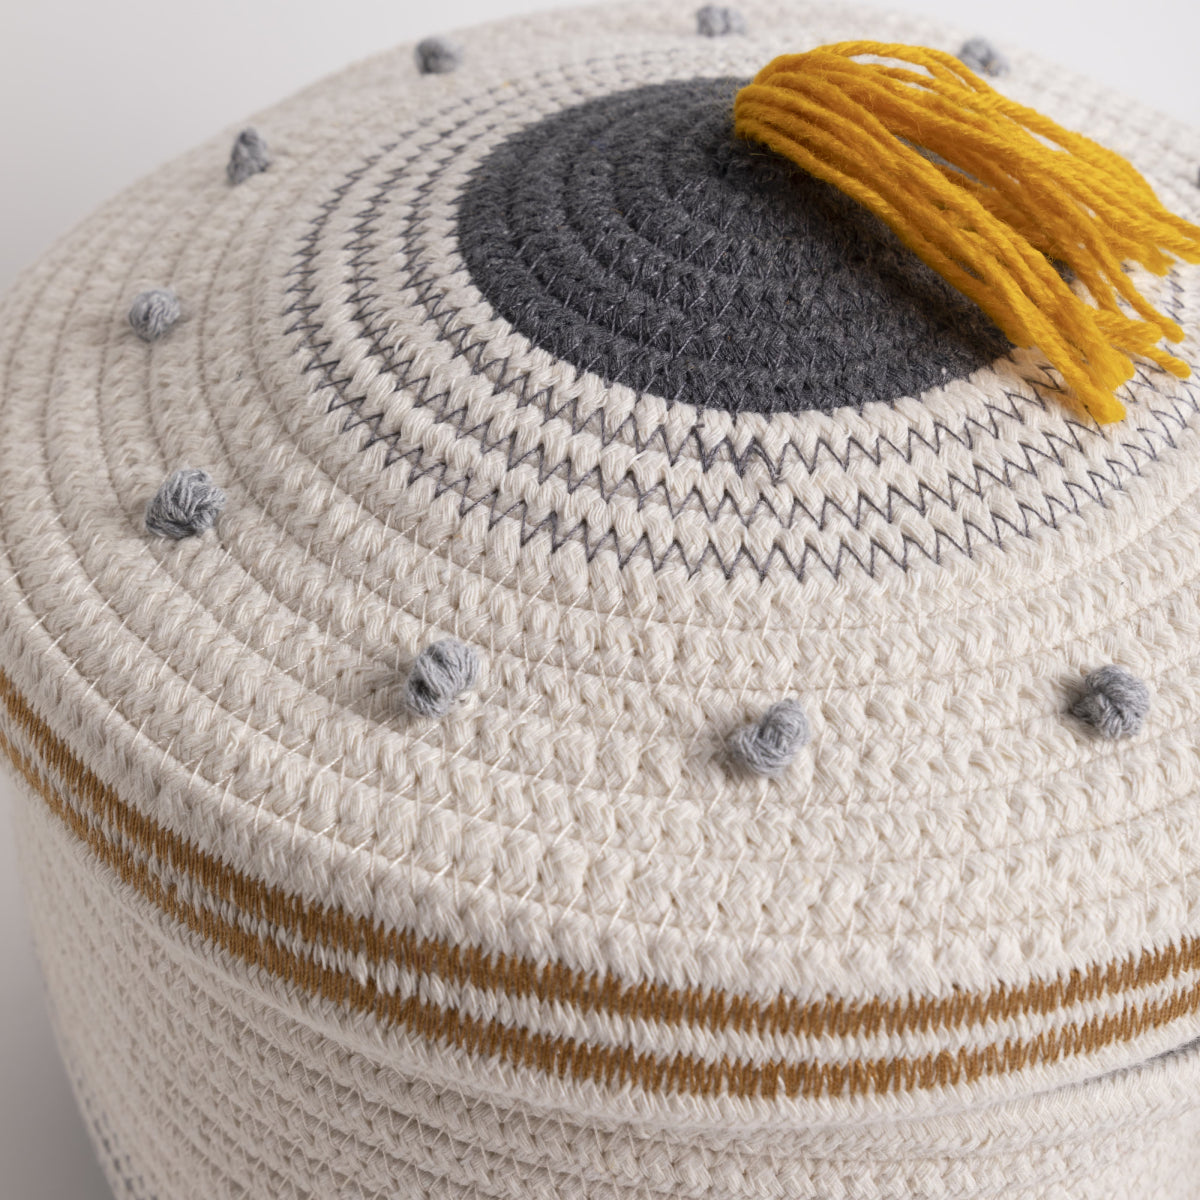 Baz Round Cotton Rope Basket with Lid - P I C N I C 